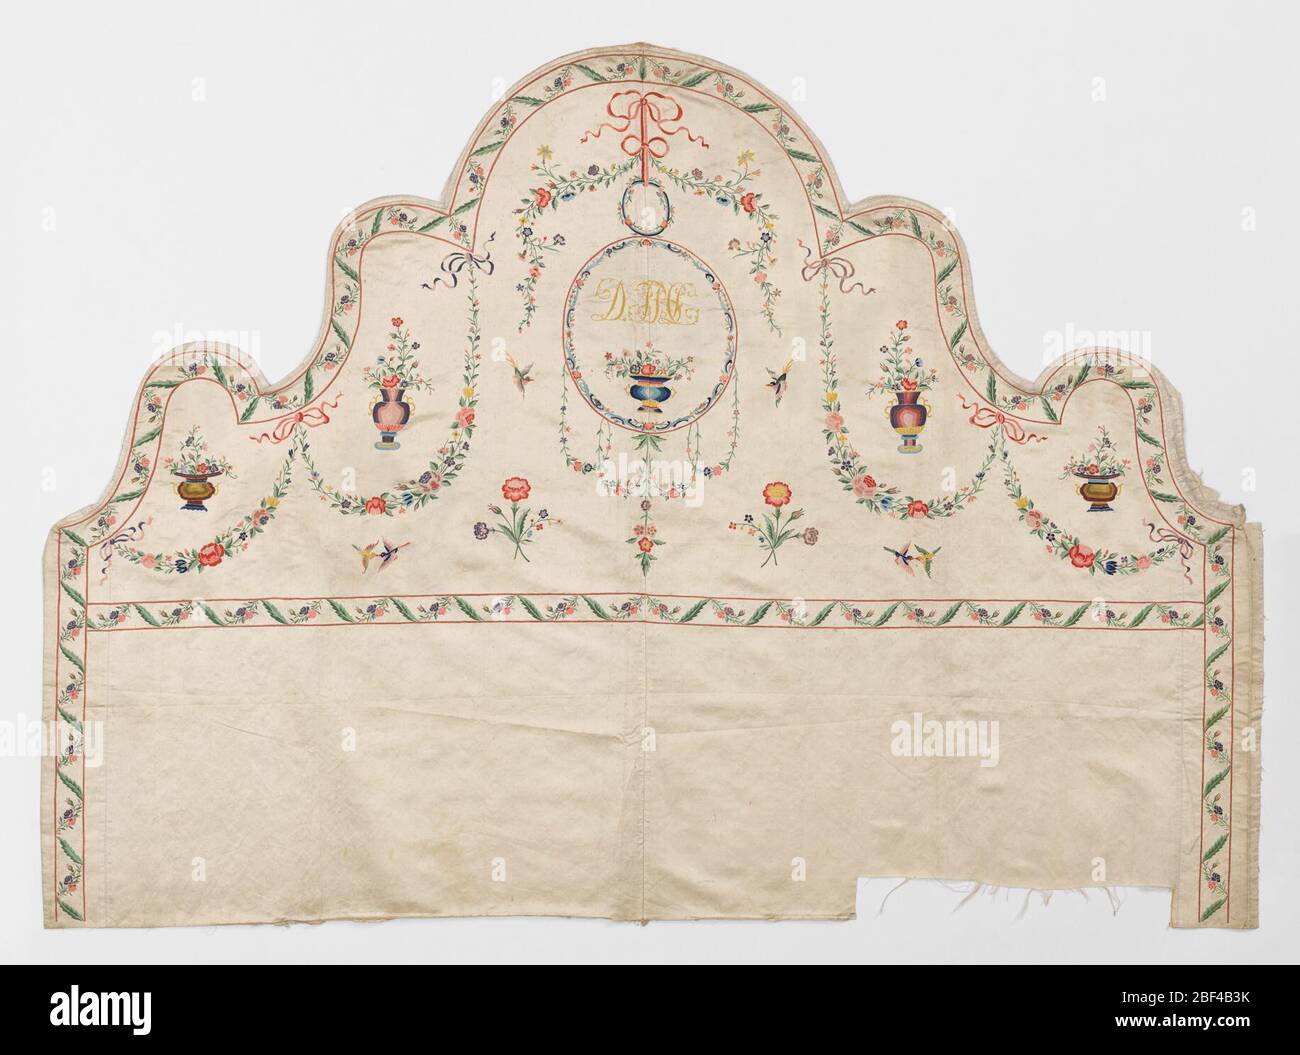 Headboard panel. Embroidered headboard panel of ivory satin worked in multicolored silks in a pattern of delicate floral garlands, jars of flowers, ribbons and birds. Initials (illegible) embroidered in a central medallion. Stock Photo